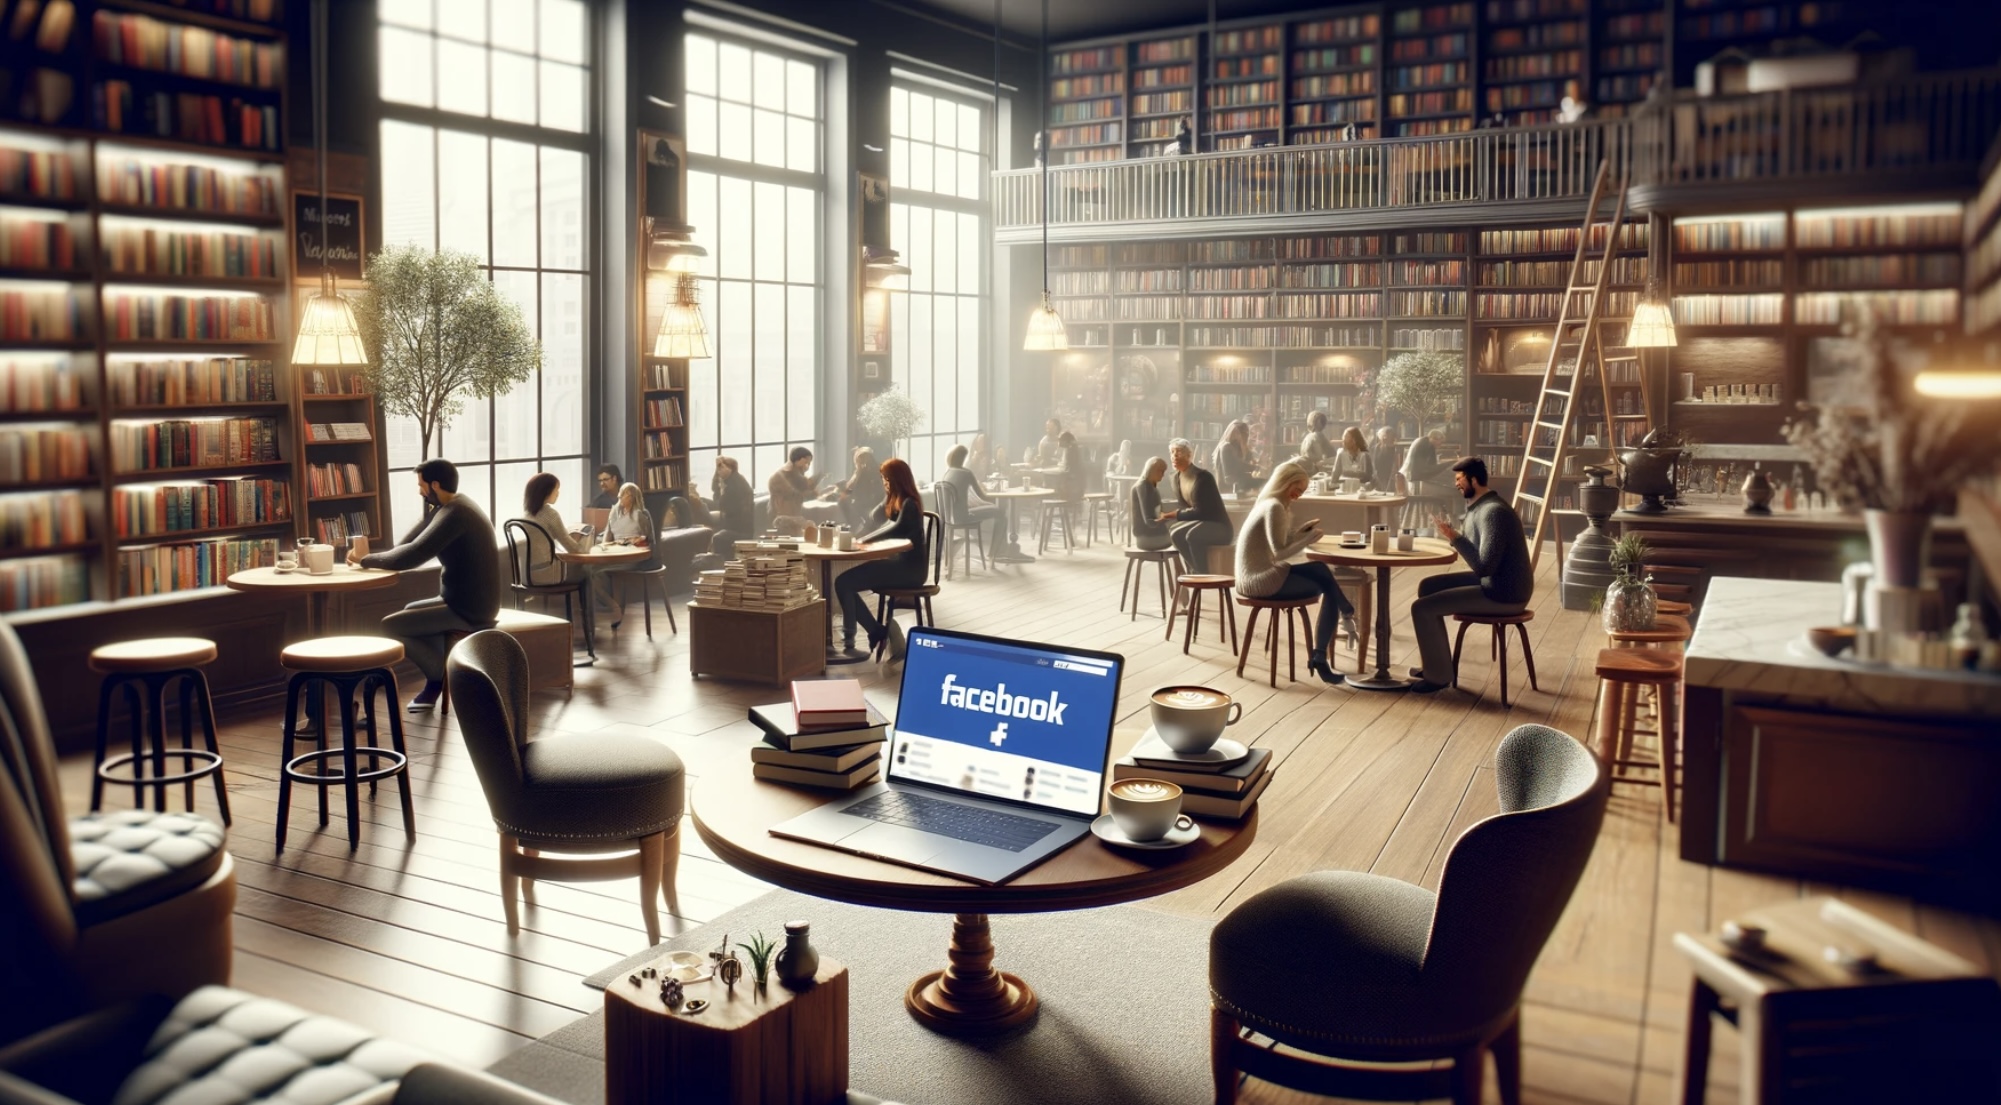 Here is a wide-angle image depicting a cozy and inviting coffee shop corner, which metaphorically represents an author Facebook page, Facebook marketing for authors, and author Facebook page tips. 